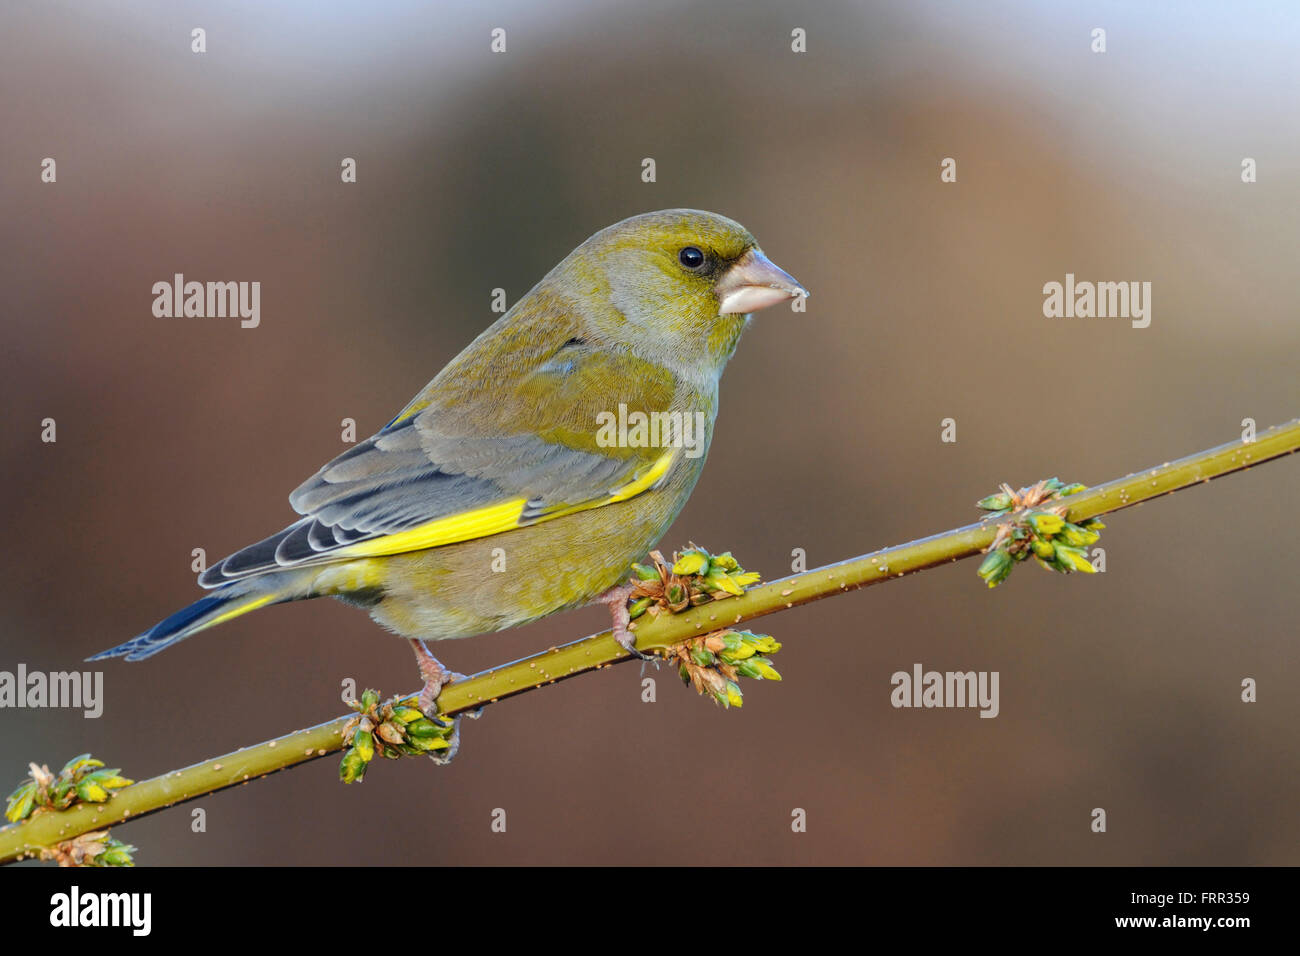 European Greenfinch / Grünfink ( Carduelis chloris ), male bird in breeding dress, perched on a branch with yellow blossoms. Stock Photo